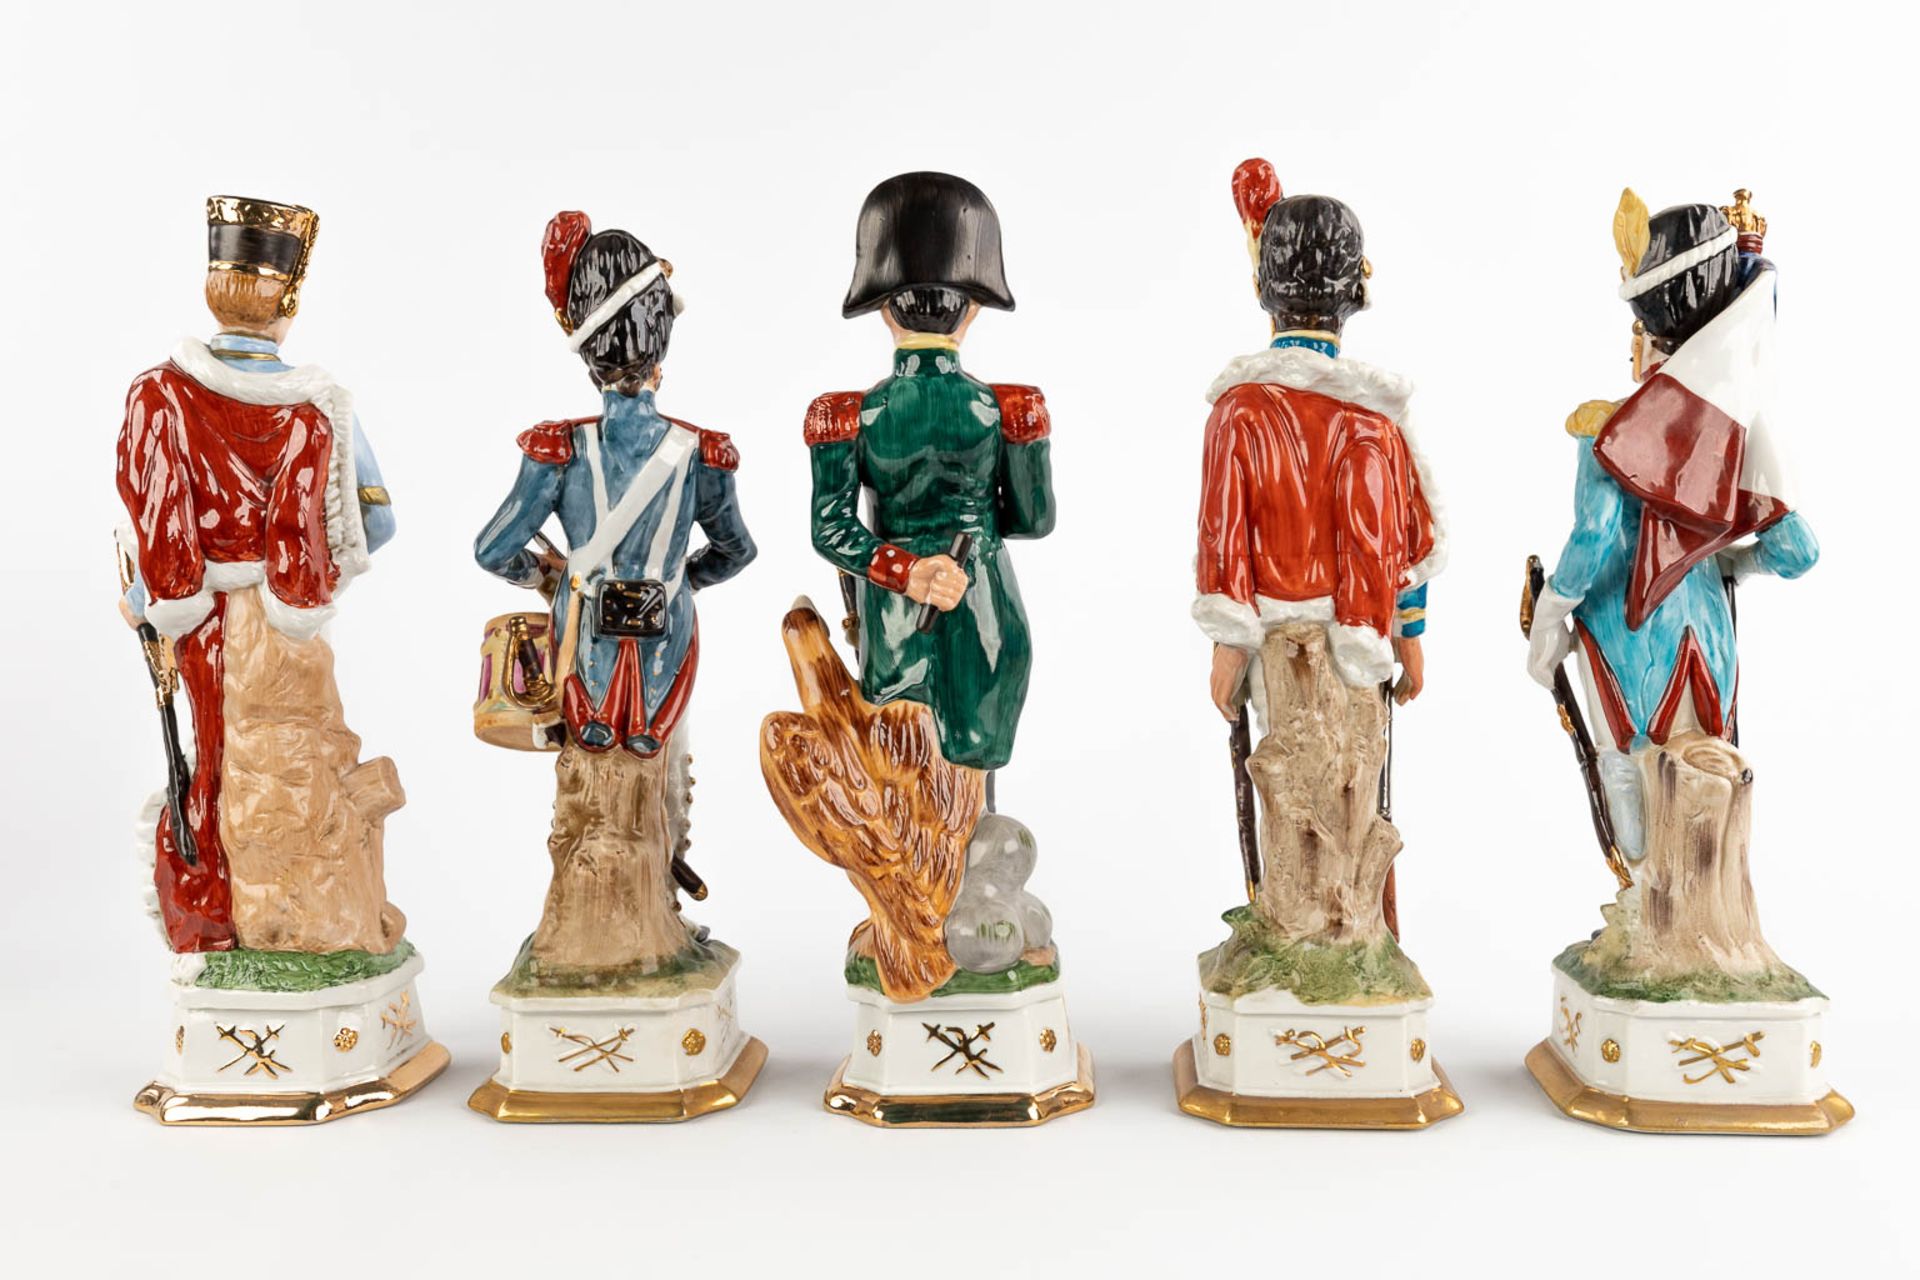 Napoleon and 9 generals, polychrome porcelain. 20th C. (H:32 cm) - Image 13 of 15